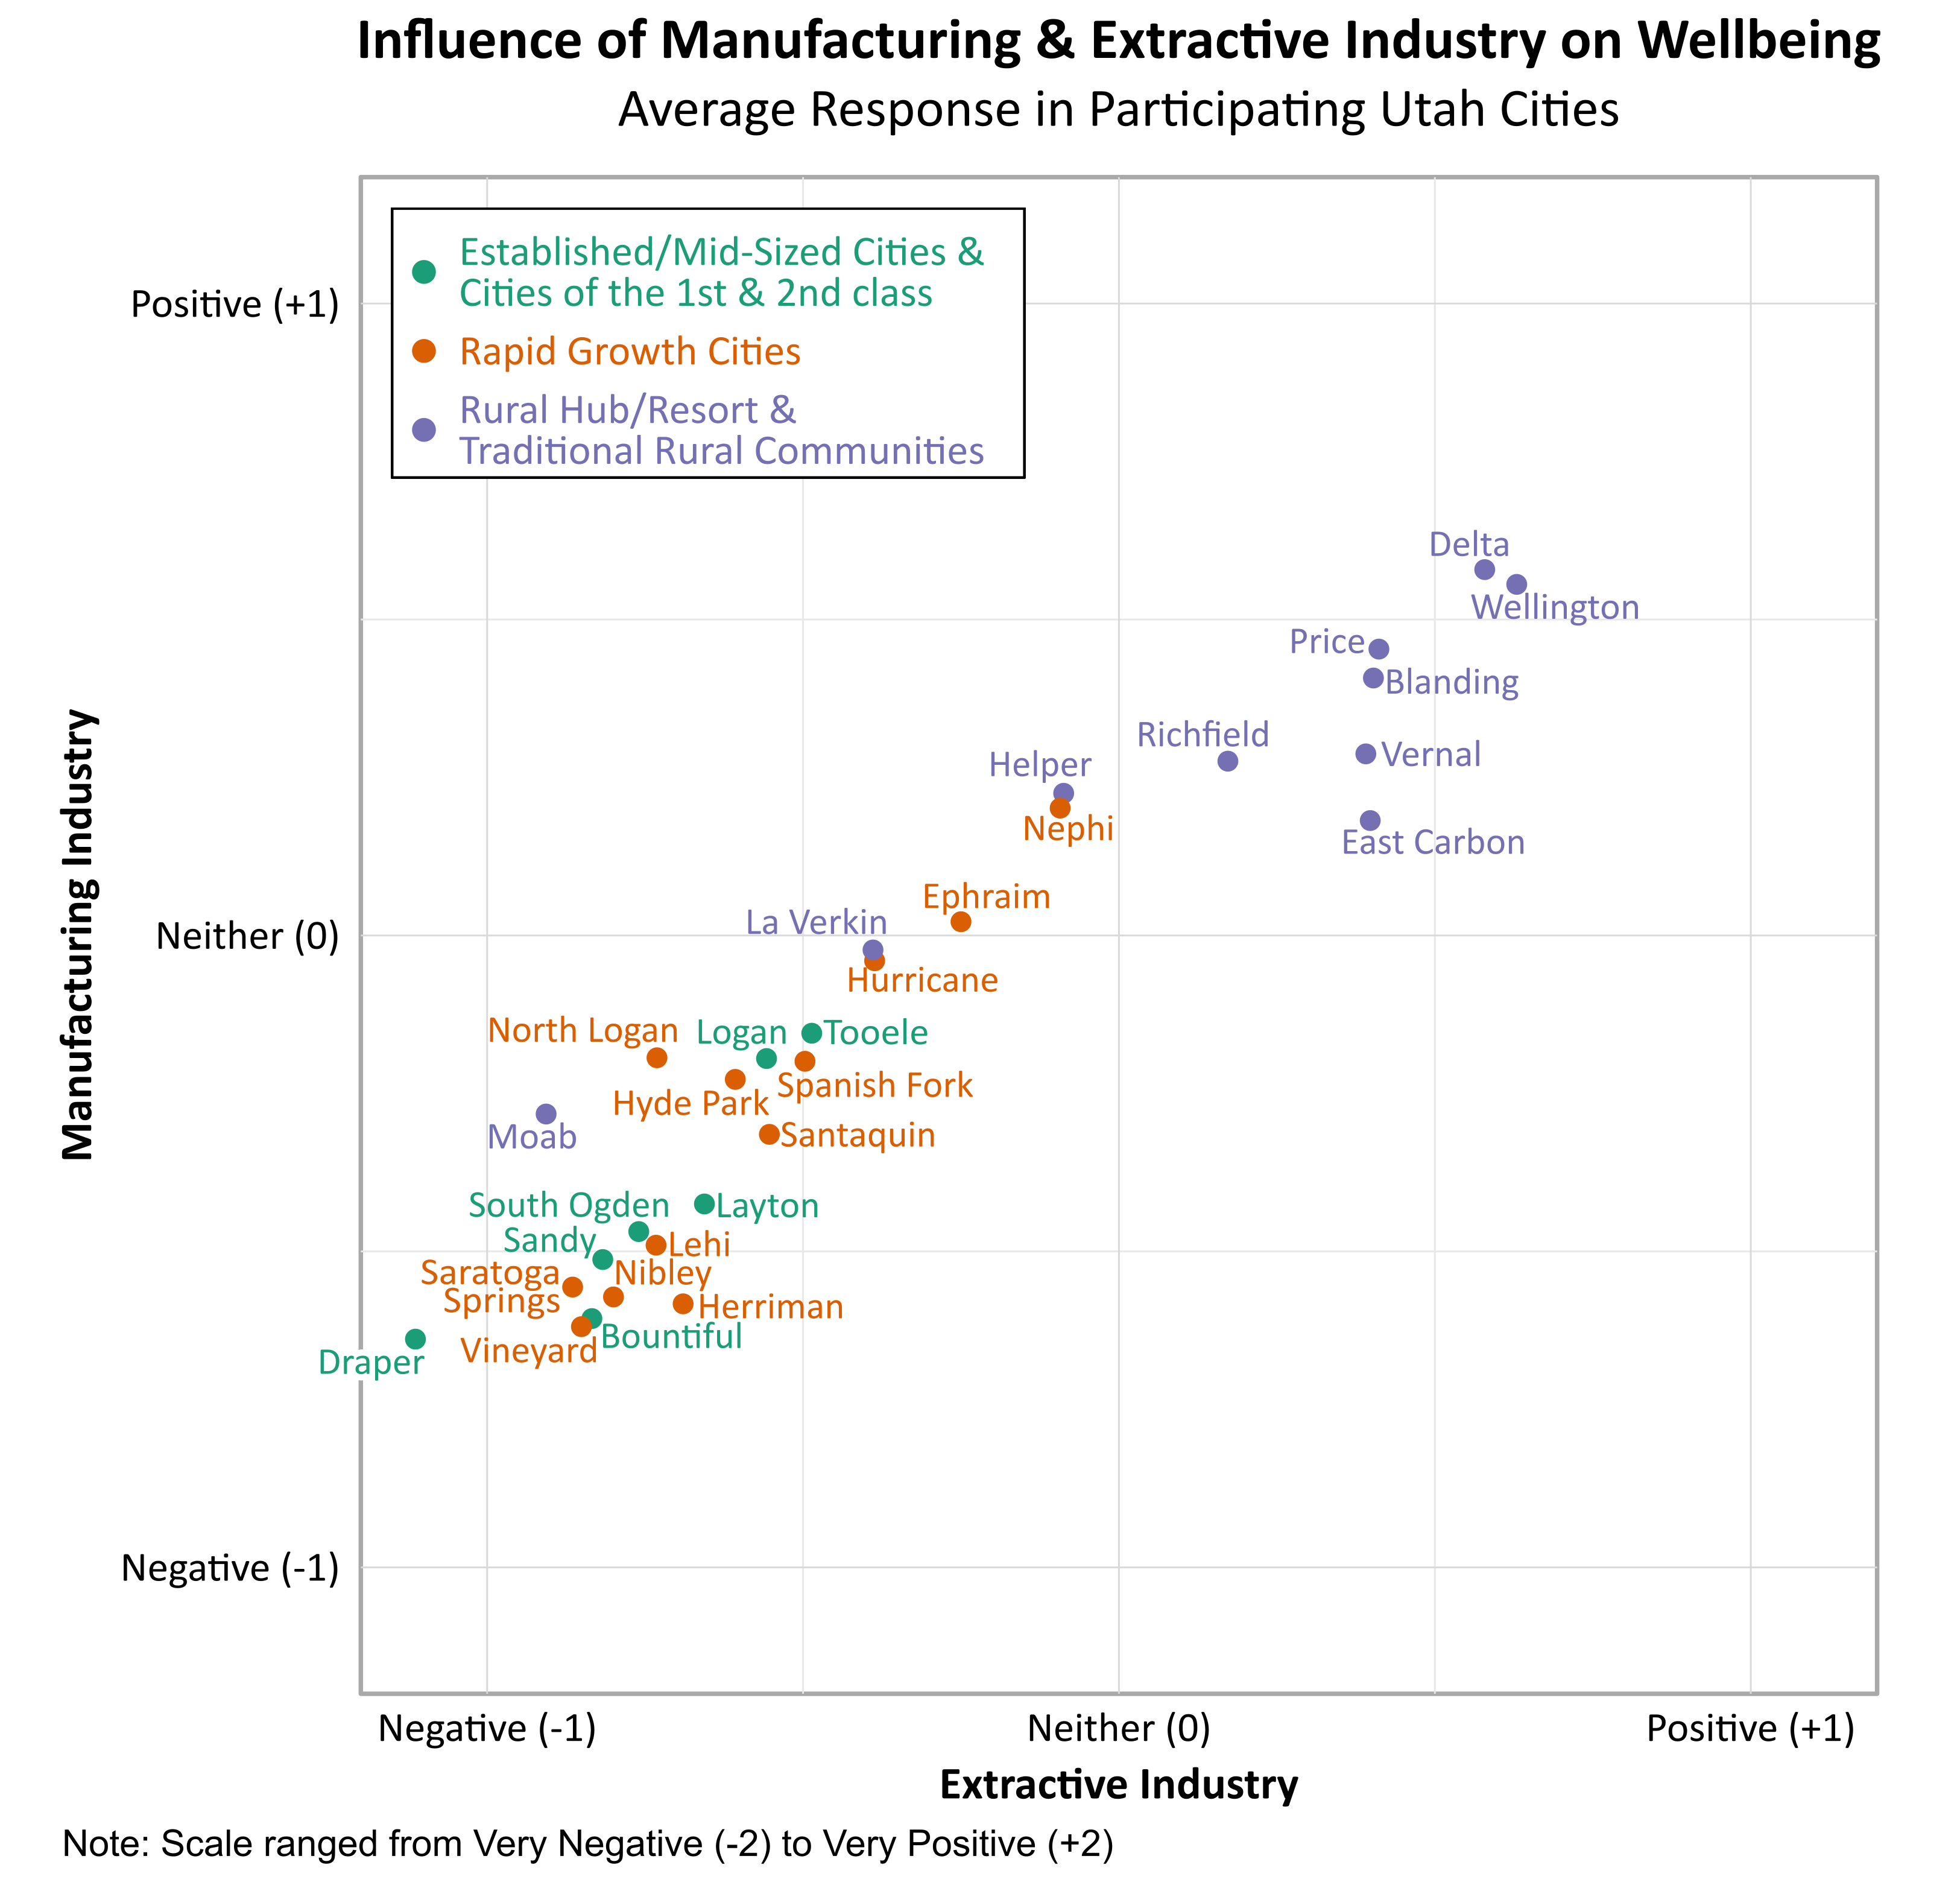 Graph: Scatter Plot. Title: Influence of Extractive and Manufacturing Development on Wellbeing. Subtitle: Average Responses in Participating Utah Cities. (Position on Plot is represented in coordinates where the X- axis is Extractive development and y axis is Manufacturing development). Category: Established Mid-Sized Cities- Draper (-1.1134, -0.6388), Bountiful (-0.8342, -0.6062); Sandy (-0.8181, -0.5129); South Ogden (-0.7600, -0.4686); Layton (-0.6561, -0.4249); Logan (-0.5578, -0.1947); Tooele (-0.4862, -0.1538); Category: Rapid Growth Cities- Saratoga Springs (-0.8647, -0.5564); Vineyard (-0.8508, -0.6190), Nibley (-0.8000, -0.5720); Herriman (-0.6898, -0.5829); Lehi (-0.7327, -0.4901s); North Logan (-0.7312, -0.1935); Hyde Park (-0.6073, -0.2277); Santiquin ( -0.5455, -0.3147); Spanish Fork (-0.4970, -0.1991); Hurricane (-0.3867, -0.0398); Ephraim (-0.2500, -0.0217); Nephi (-0.0930, 0.2016); Rural Hub/Resort and Traditional Rural Communities- Moab (-0.9066, -0.2826), La Verkin (-0.3893, -0.0229); Helper (-0.0875, 0.2250); Richfield (0.1724, 0.2759); East Carbon (0.3933, 0.2022); Vernal (0.3908, 0.3874); Blanding (0.4028, 0.4074), Price (0.4115, 0.4531); Delta (0.5789, 0.5789); Wellington (0.6296, 0.5818). 